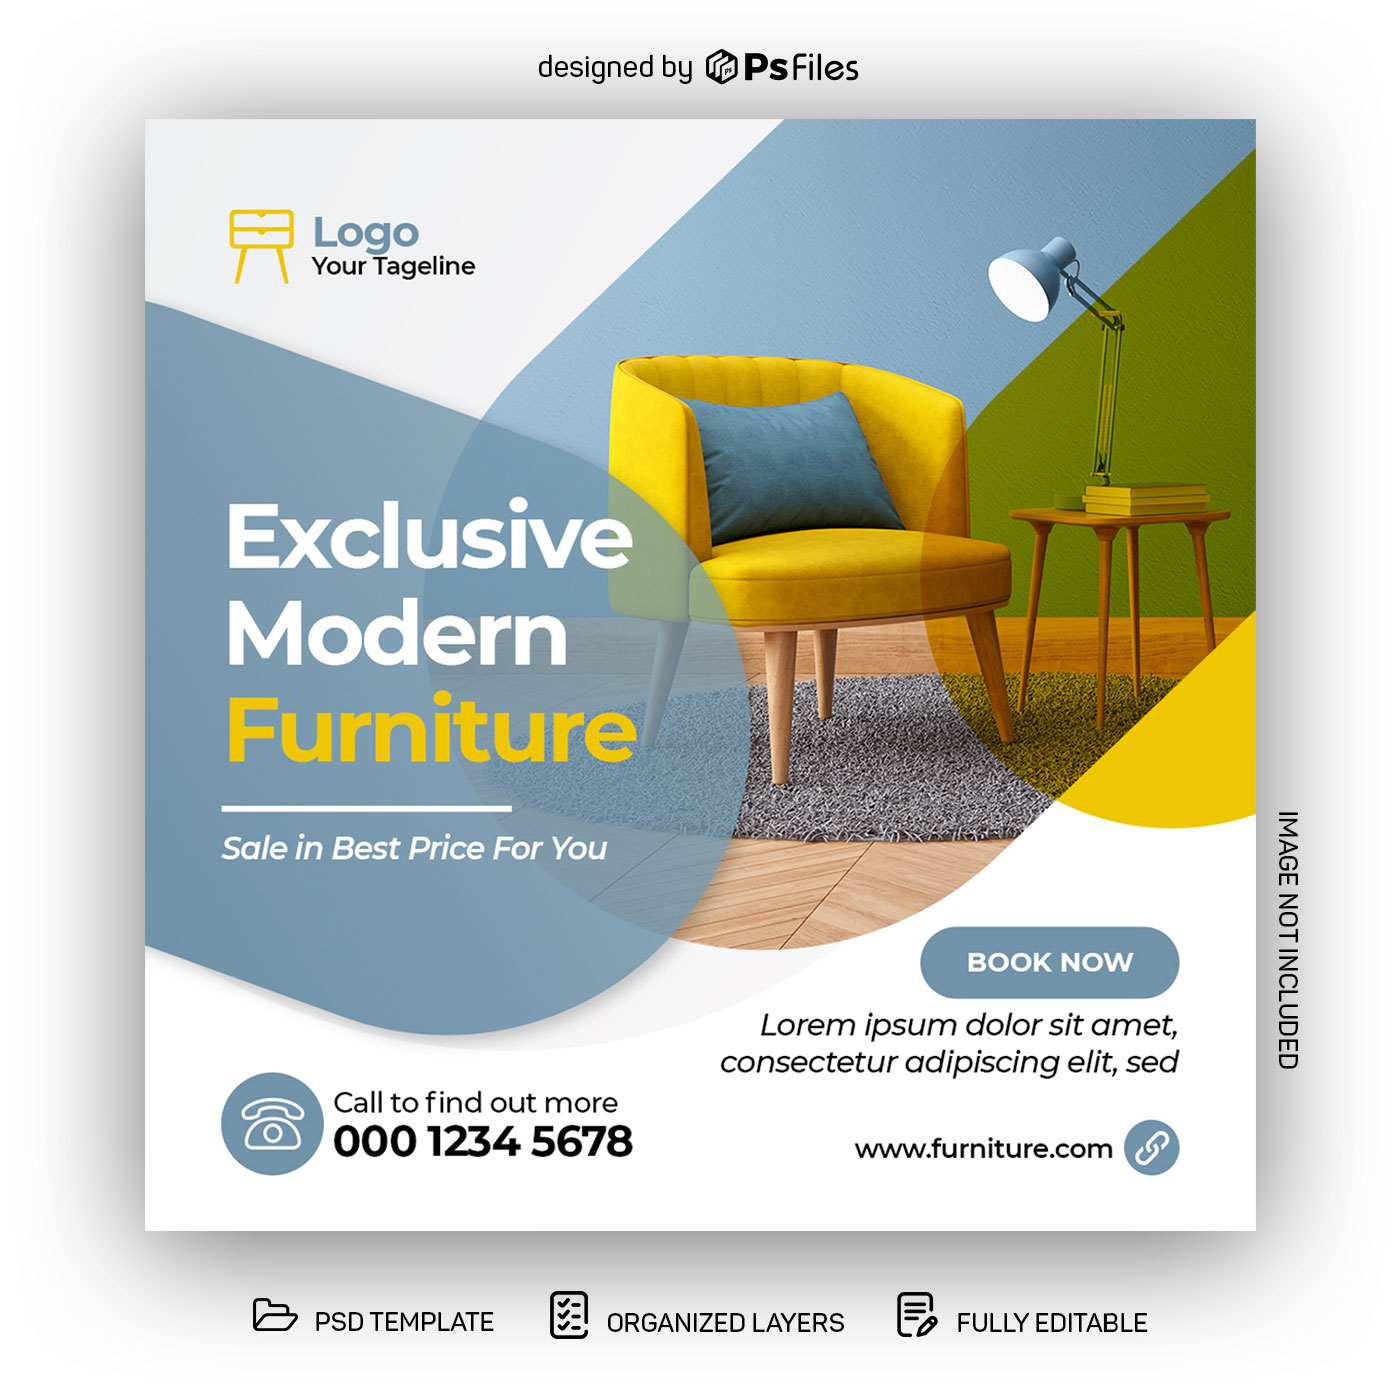 PsFiles Free Instagram Post Design PSD Template for Furniture Online Store